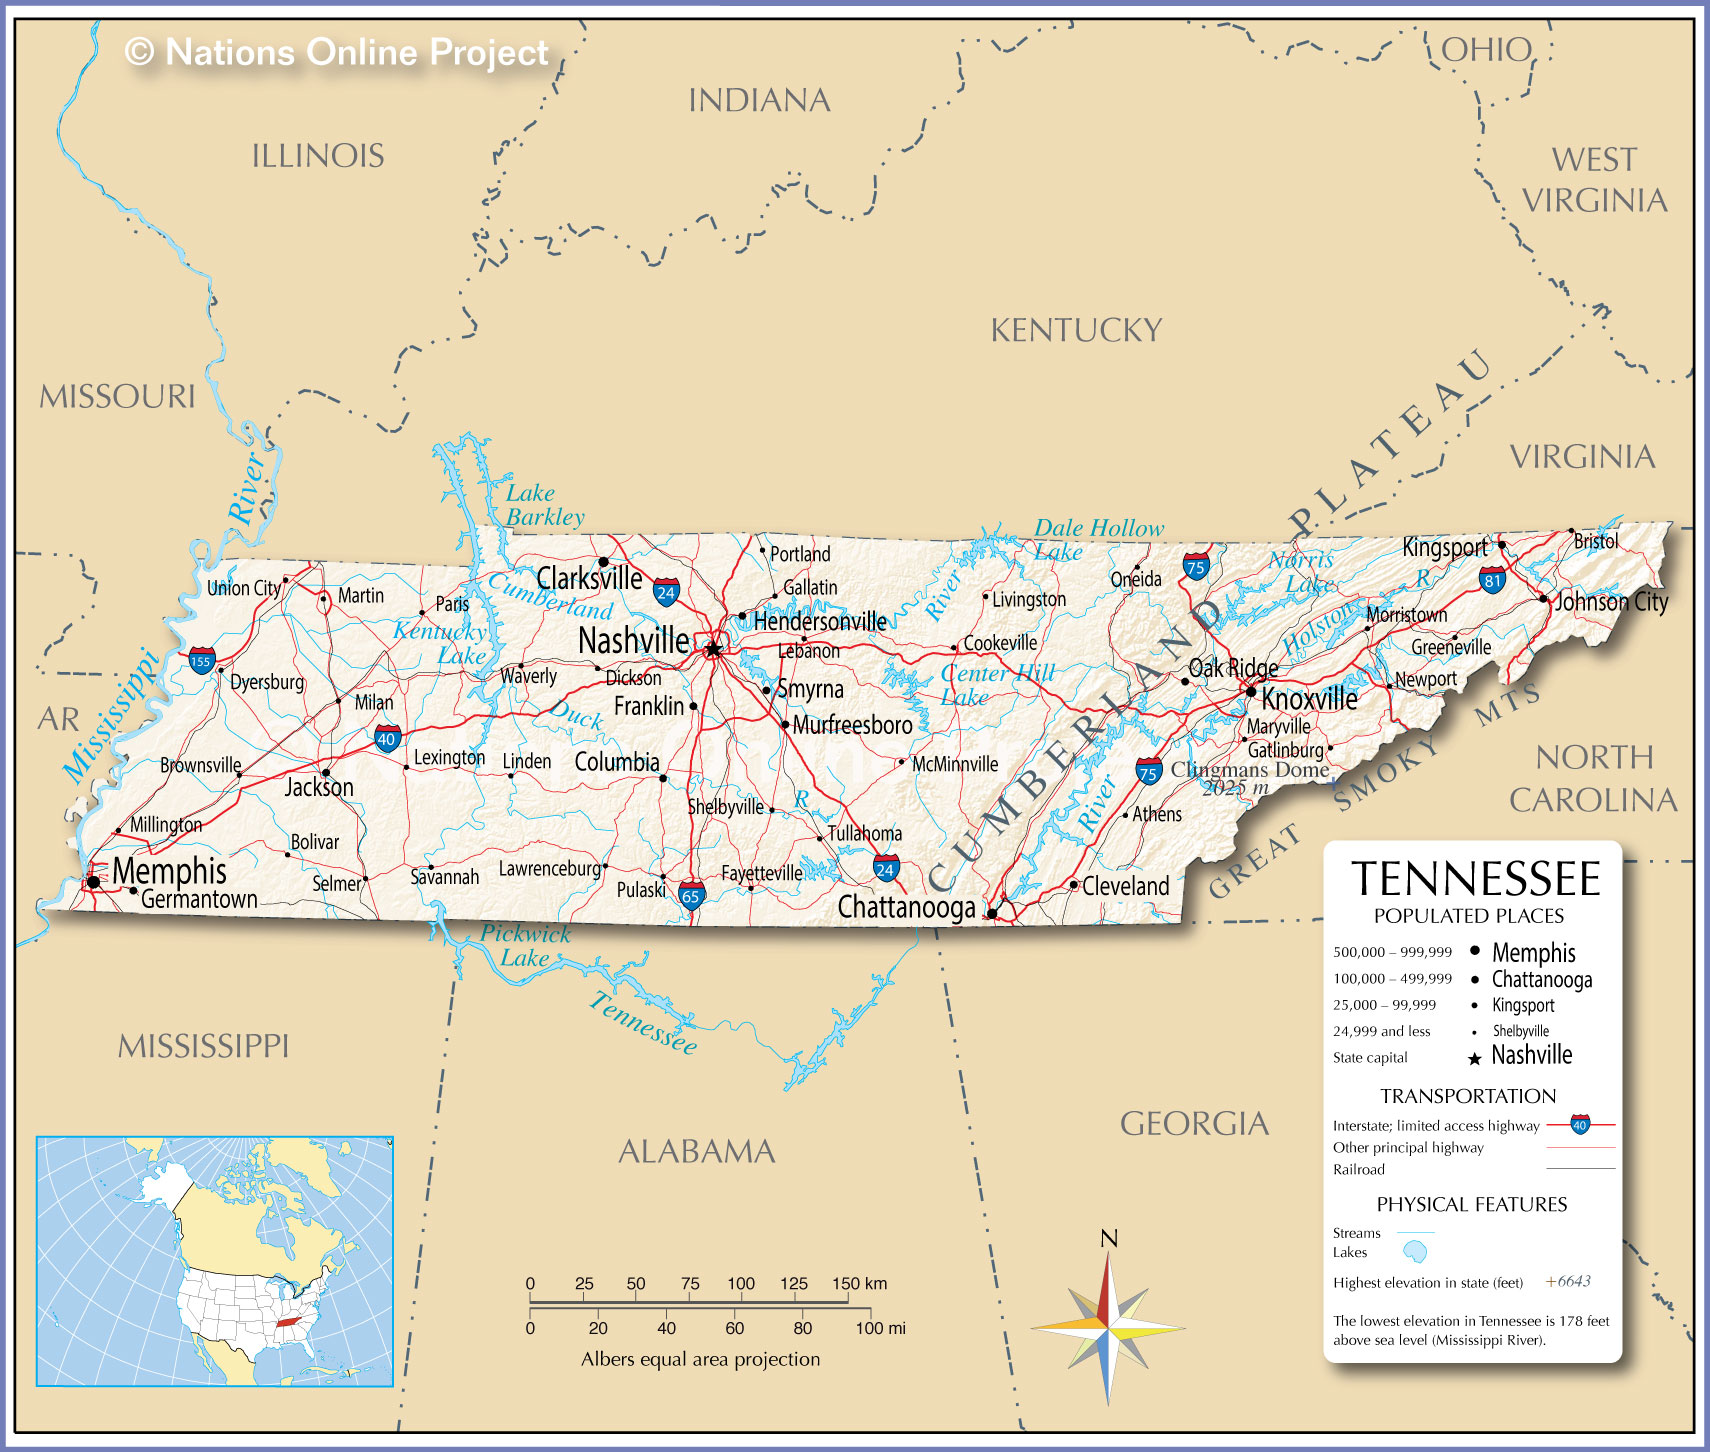 Map of Tennessee from the Nations Online Project.